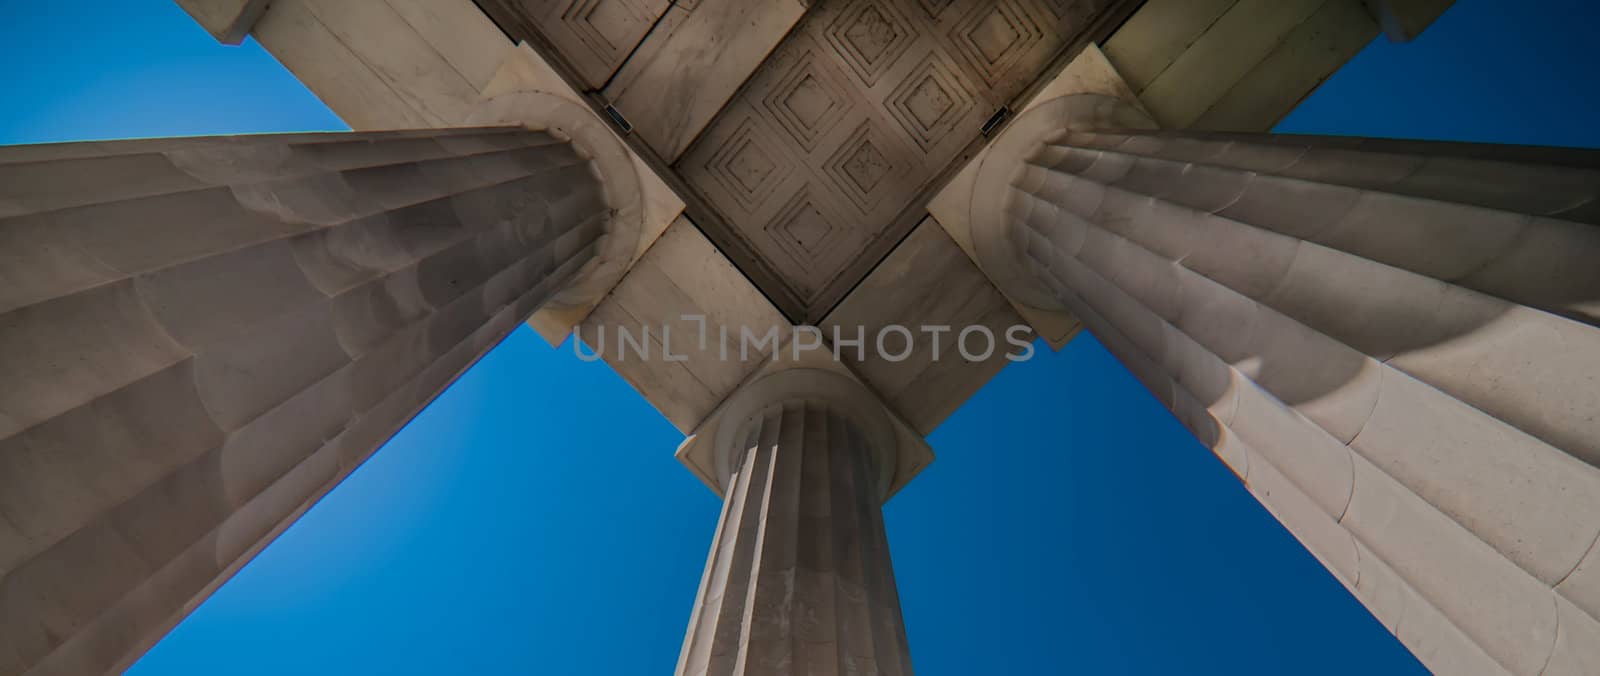 neoclassical ionic architectural details by digidreamgrafix